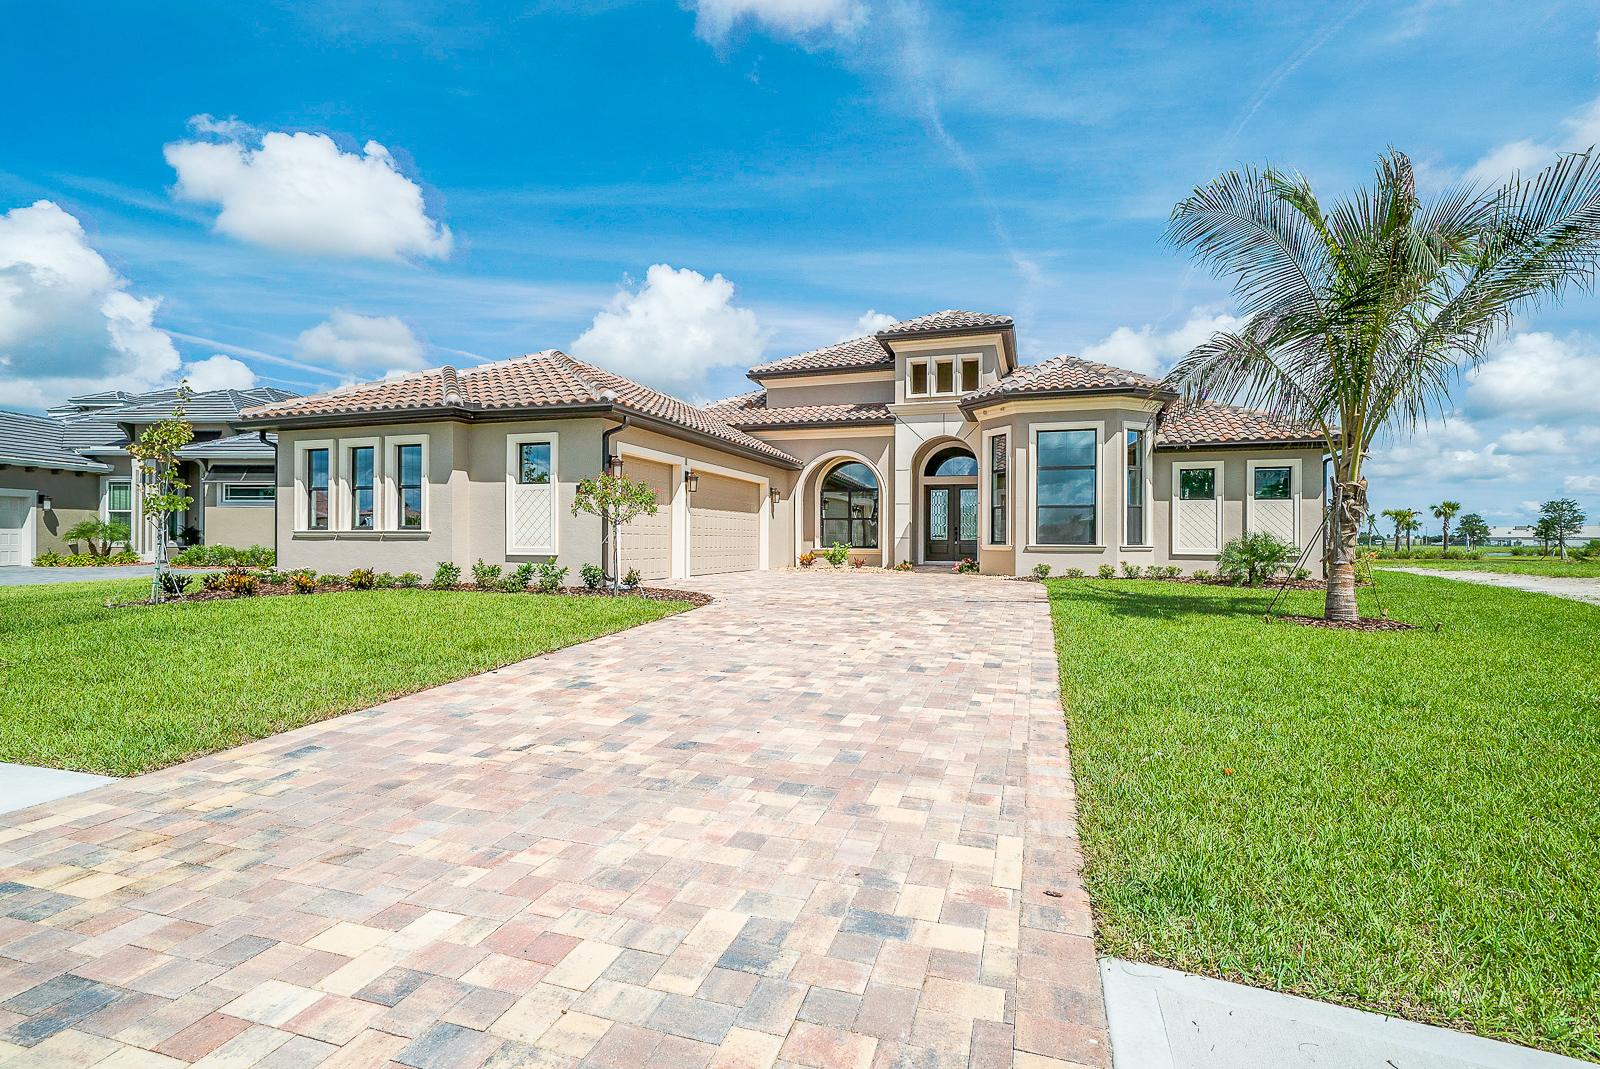  Most Popular Home Styles  in Central Florida in 2022 Home  